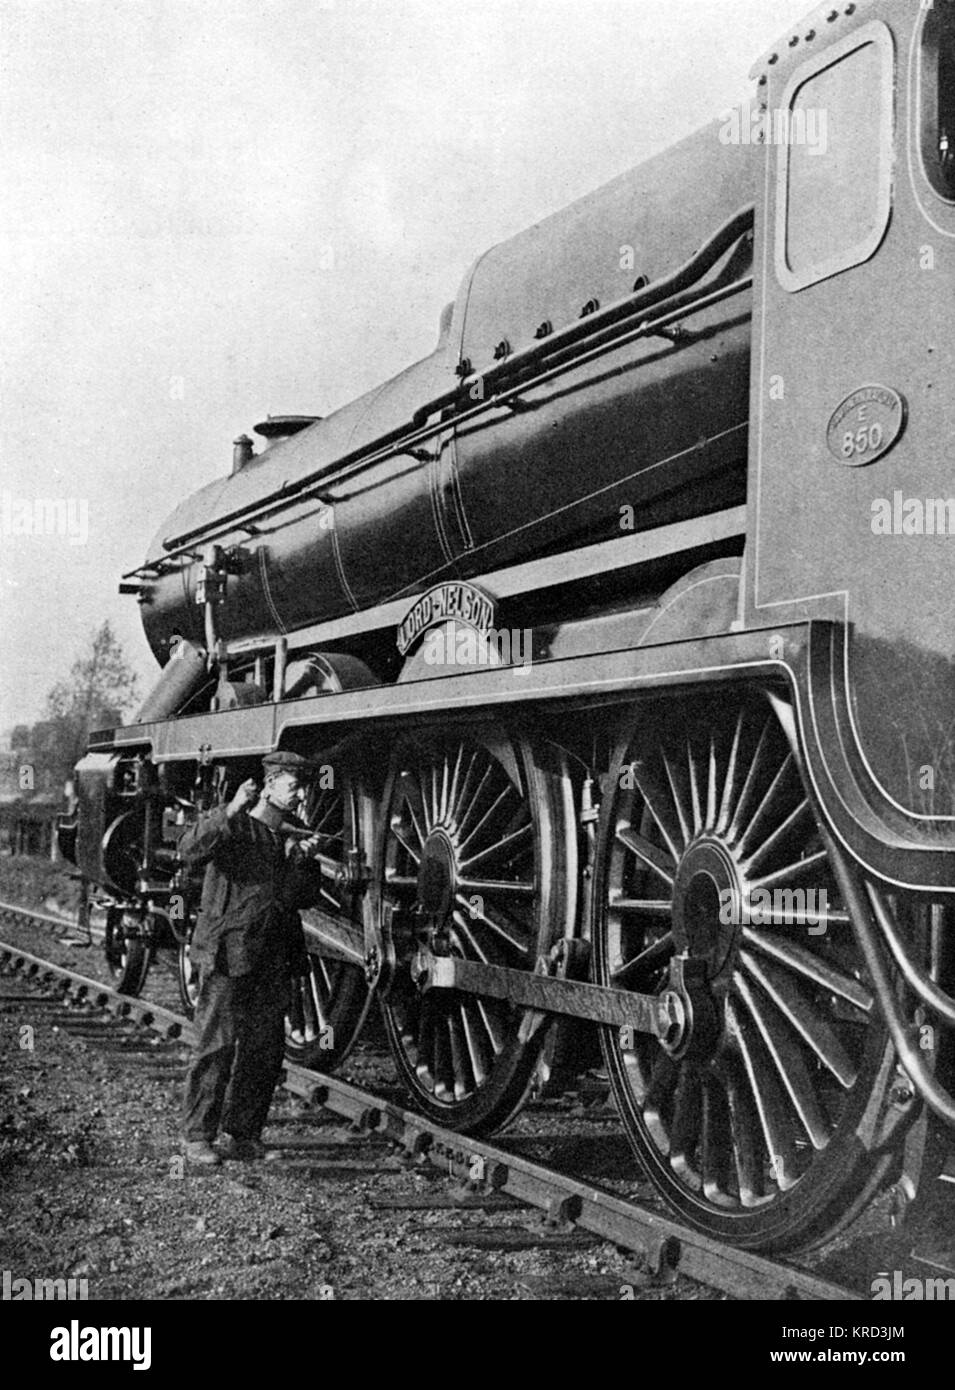 The Southern Railway engine, 'Lord Nelson' , 850, which gave its name to this class of engines, named after famous admirals. The Lord Nelson is the only preserved engine of this class.     Date: c.1926 Stock Photo